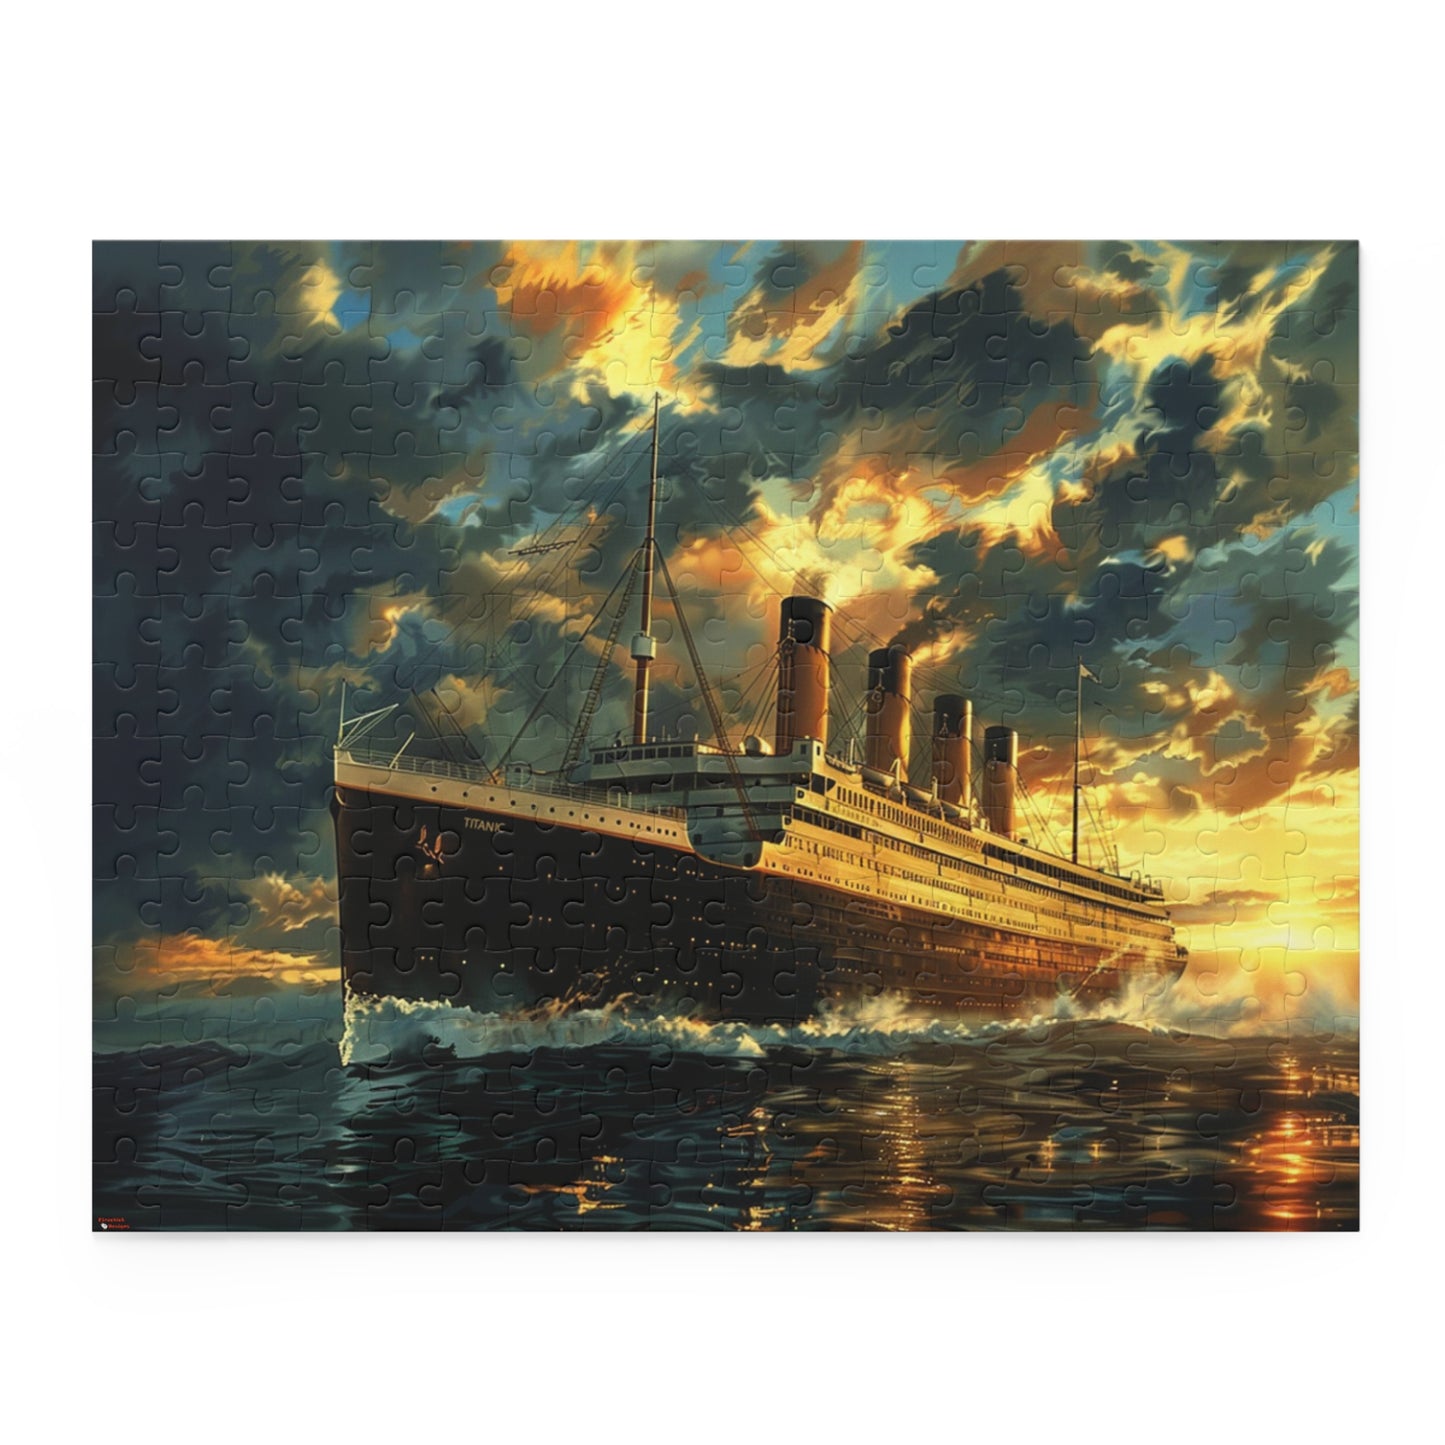 Titanic Puzzle, 3 Sizes to Choose From, 120 to 500 Pieces, Gorgeous Image of the Ship at Sunrise